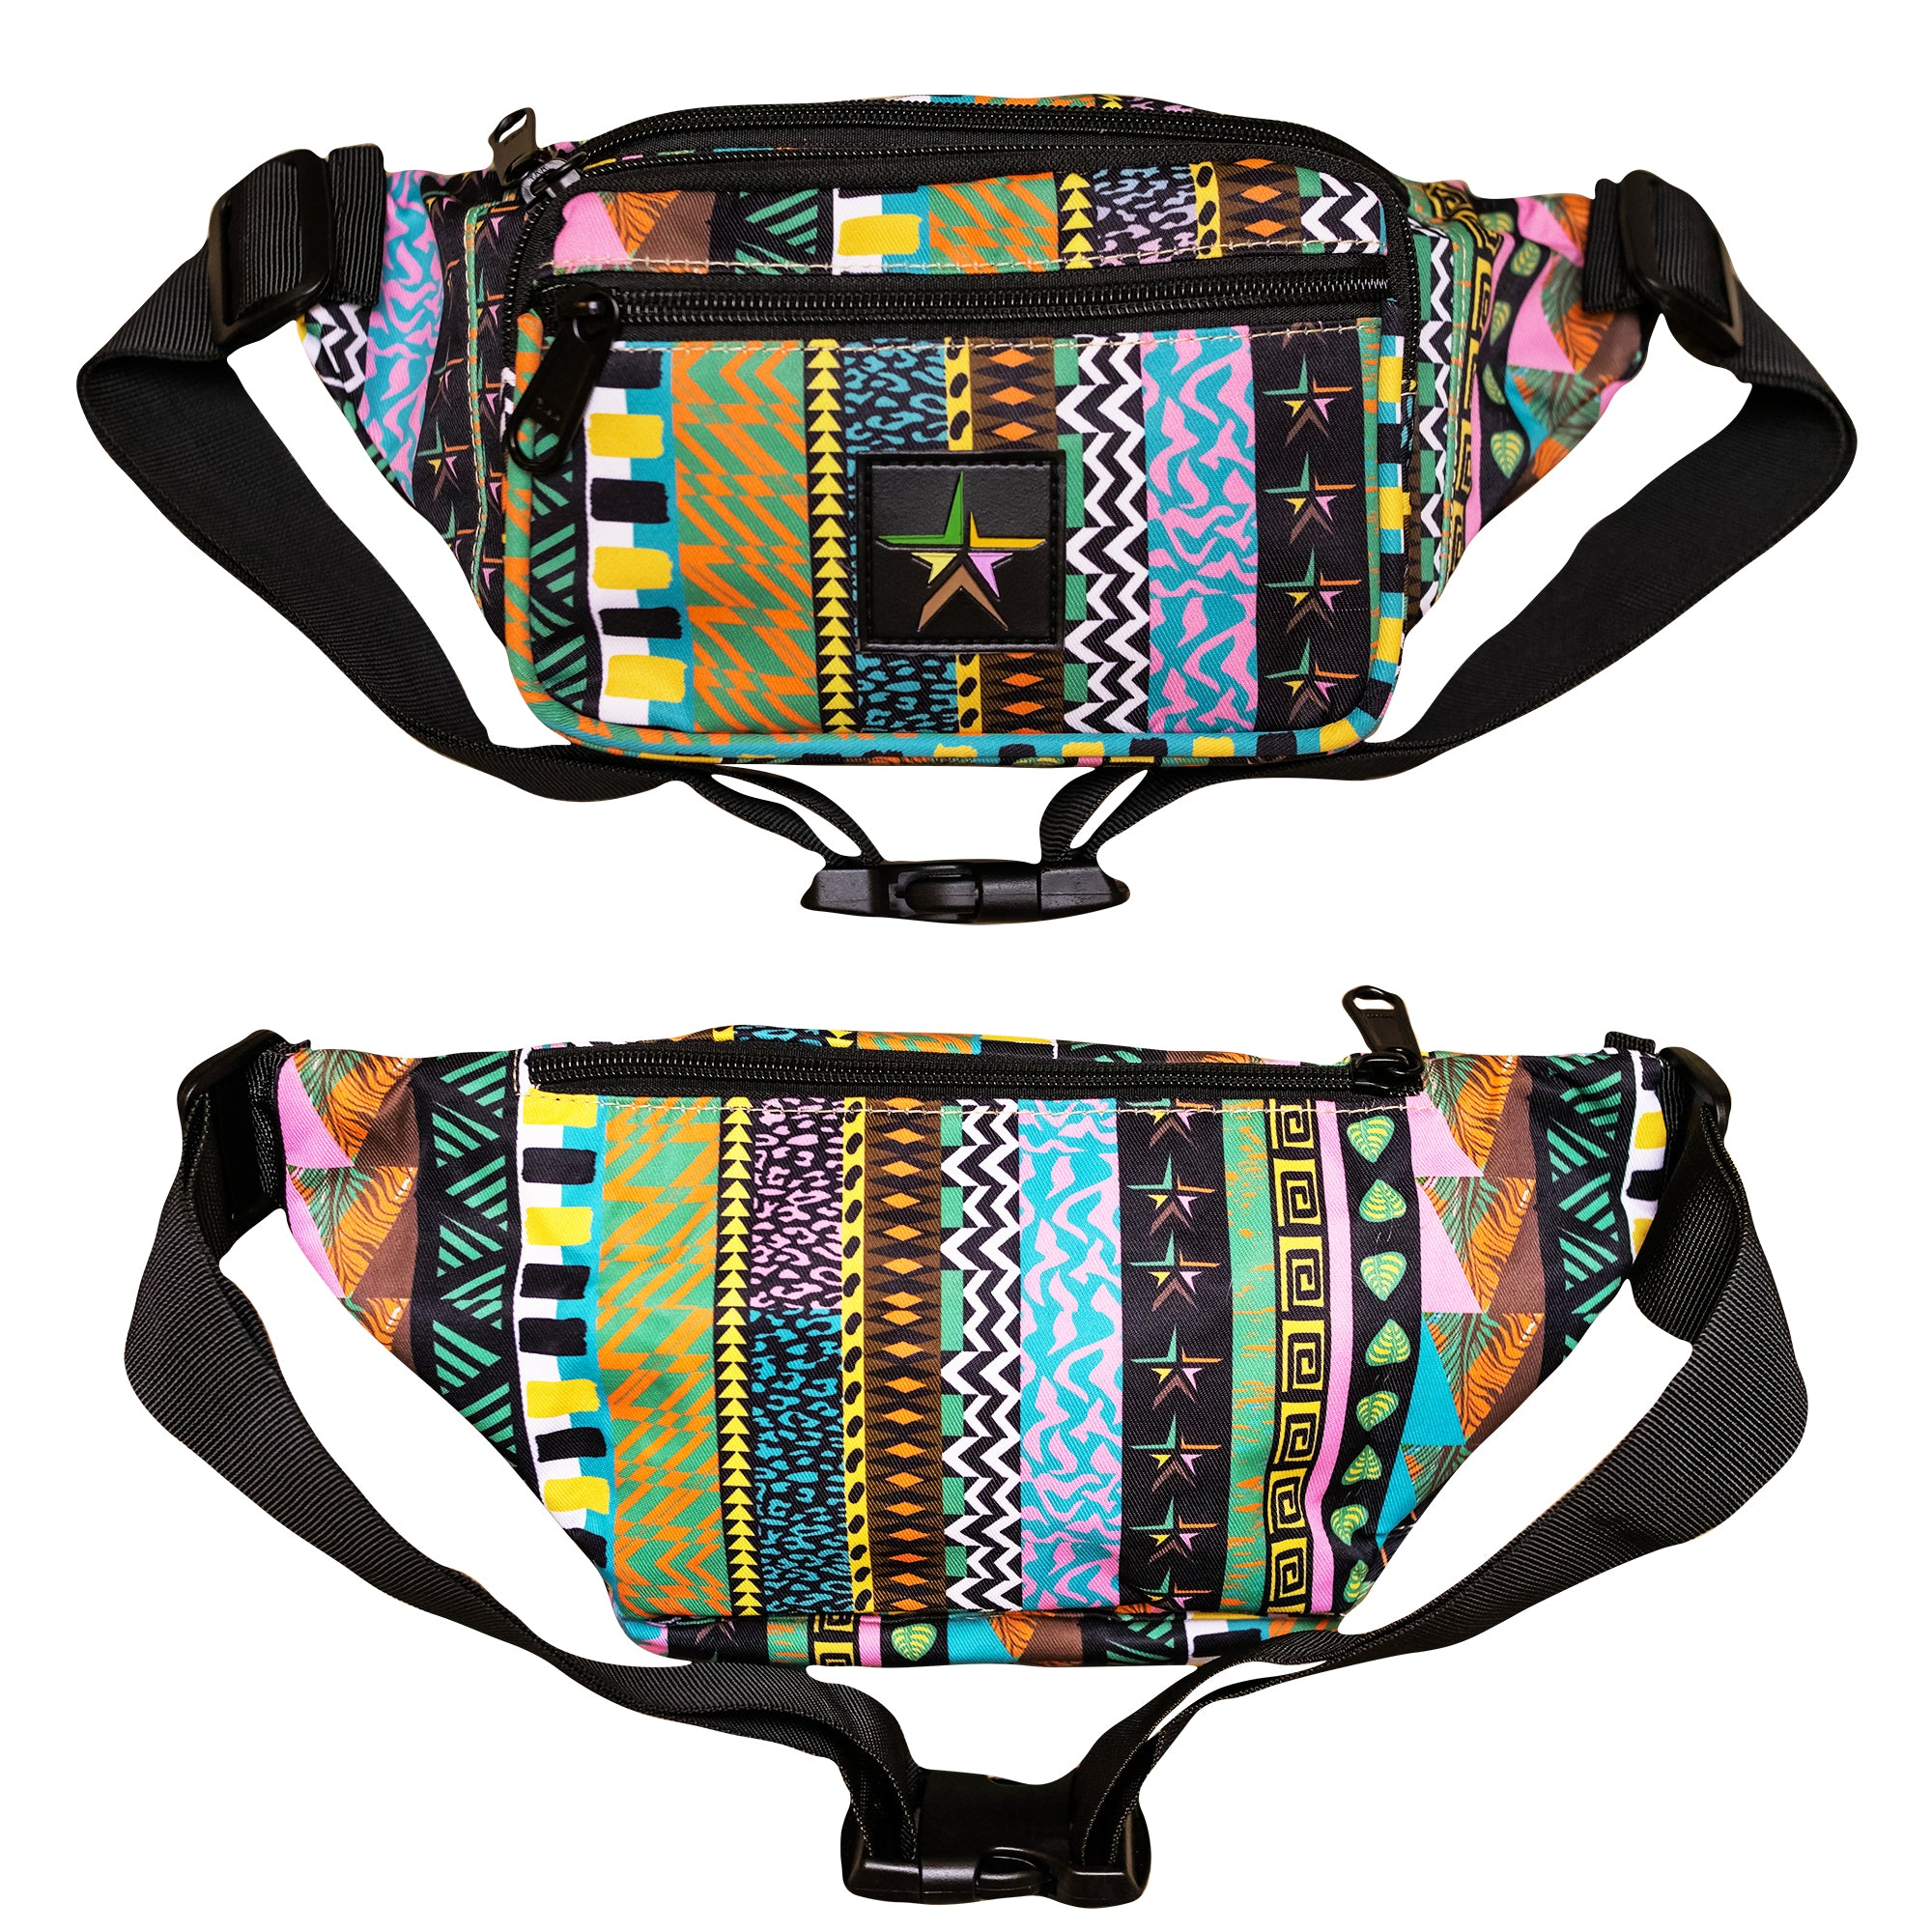 Retro coogi inspired throwback fresh prince style design fanny pack with a jazz and urban twist. Pink, orange, black, yellow, green, brown colors with 4 pockets. B Fresh Gear